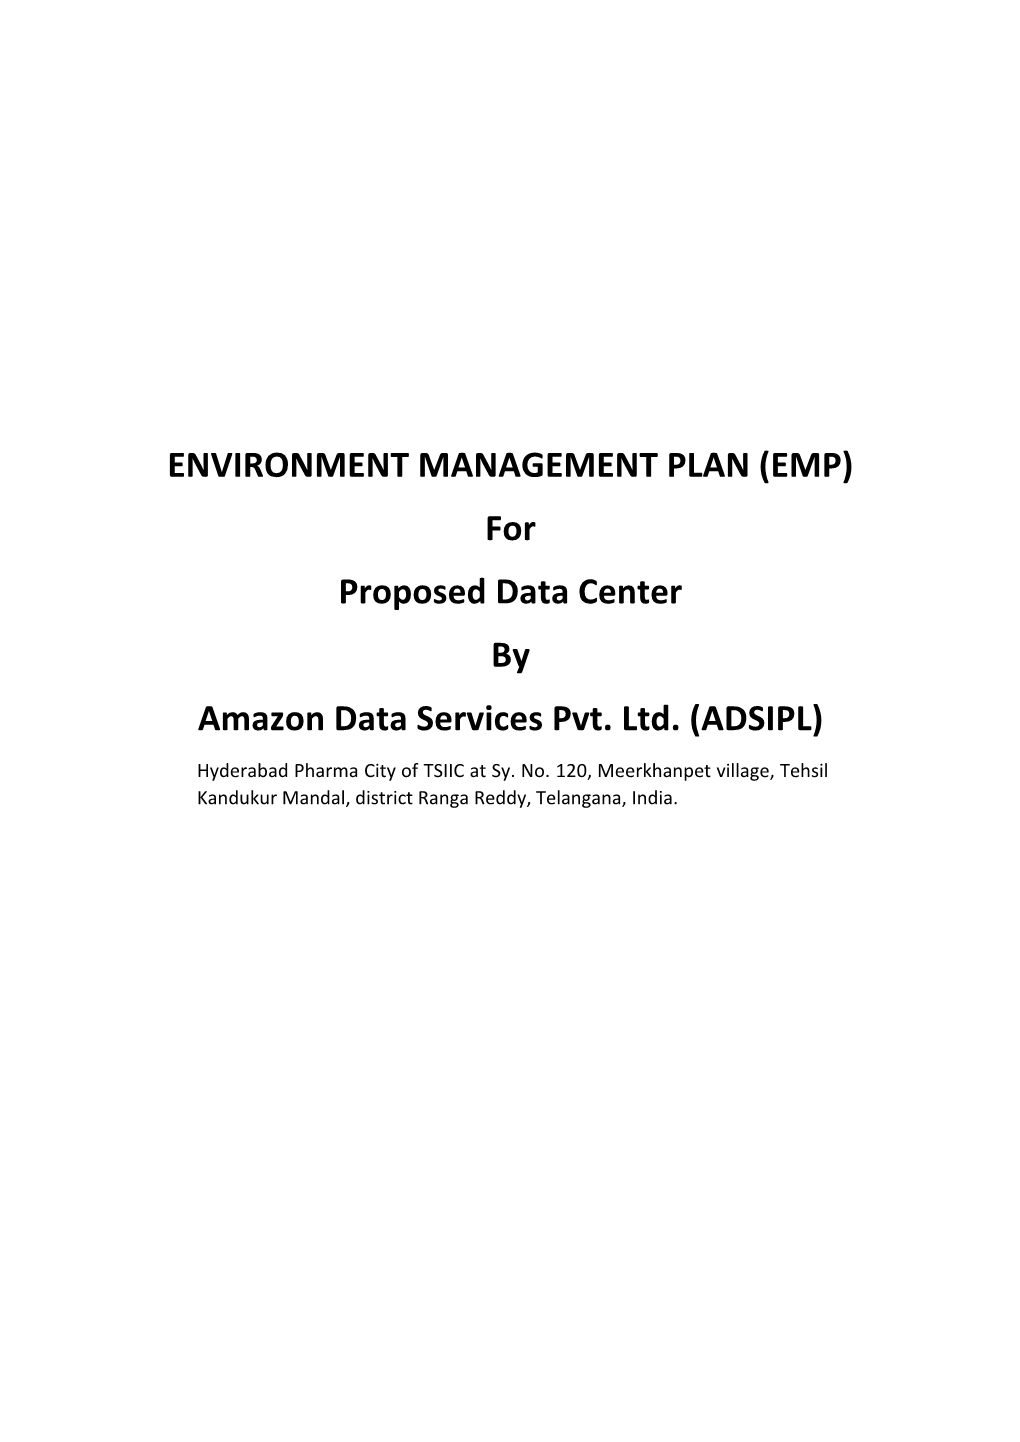 EMP) for Proposed Data Center by Amazon Data Services Pvt. Ltd. (ADSIPL